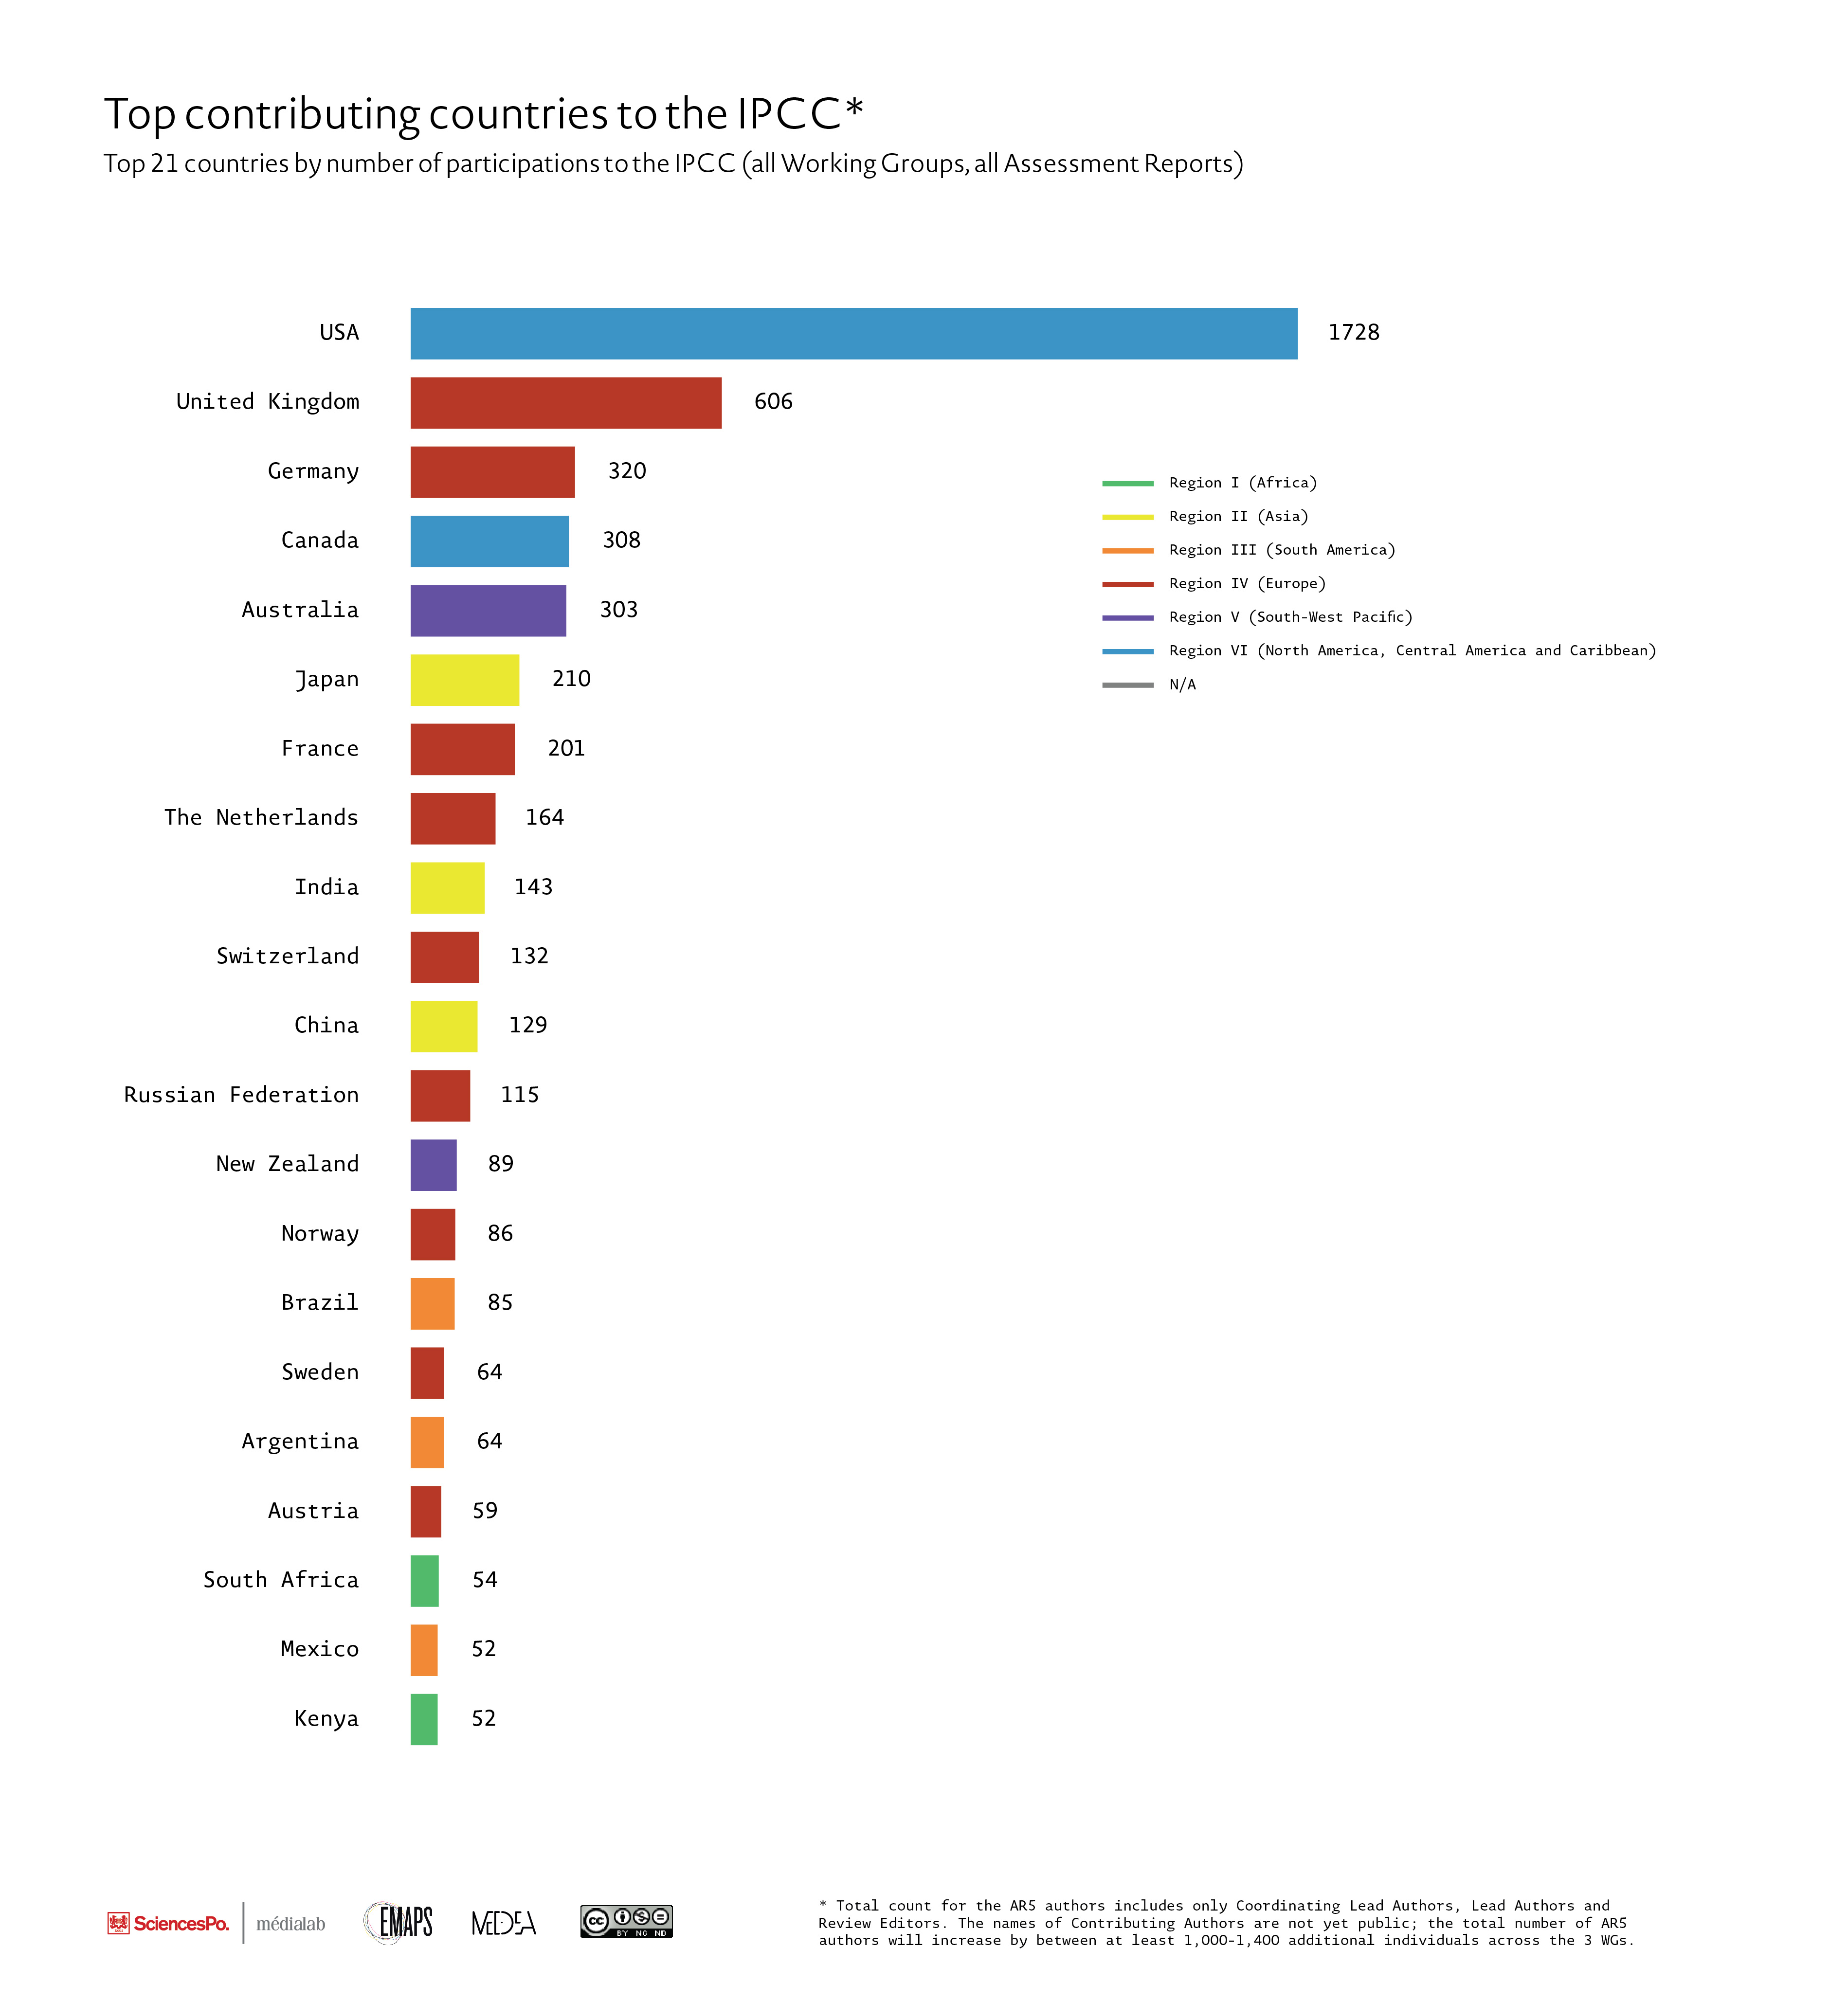 Fig. 3. Top contributing countries to the IPCC